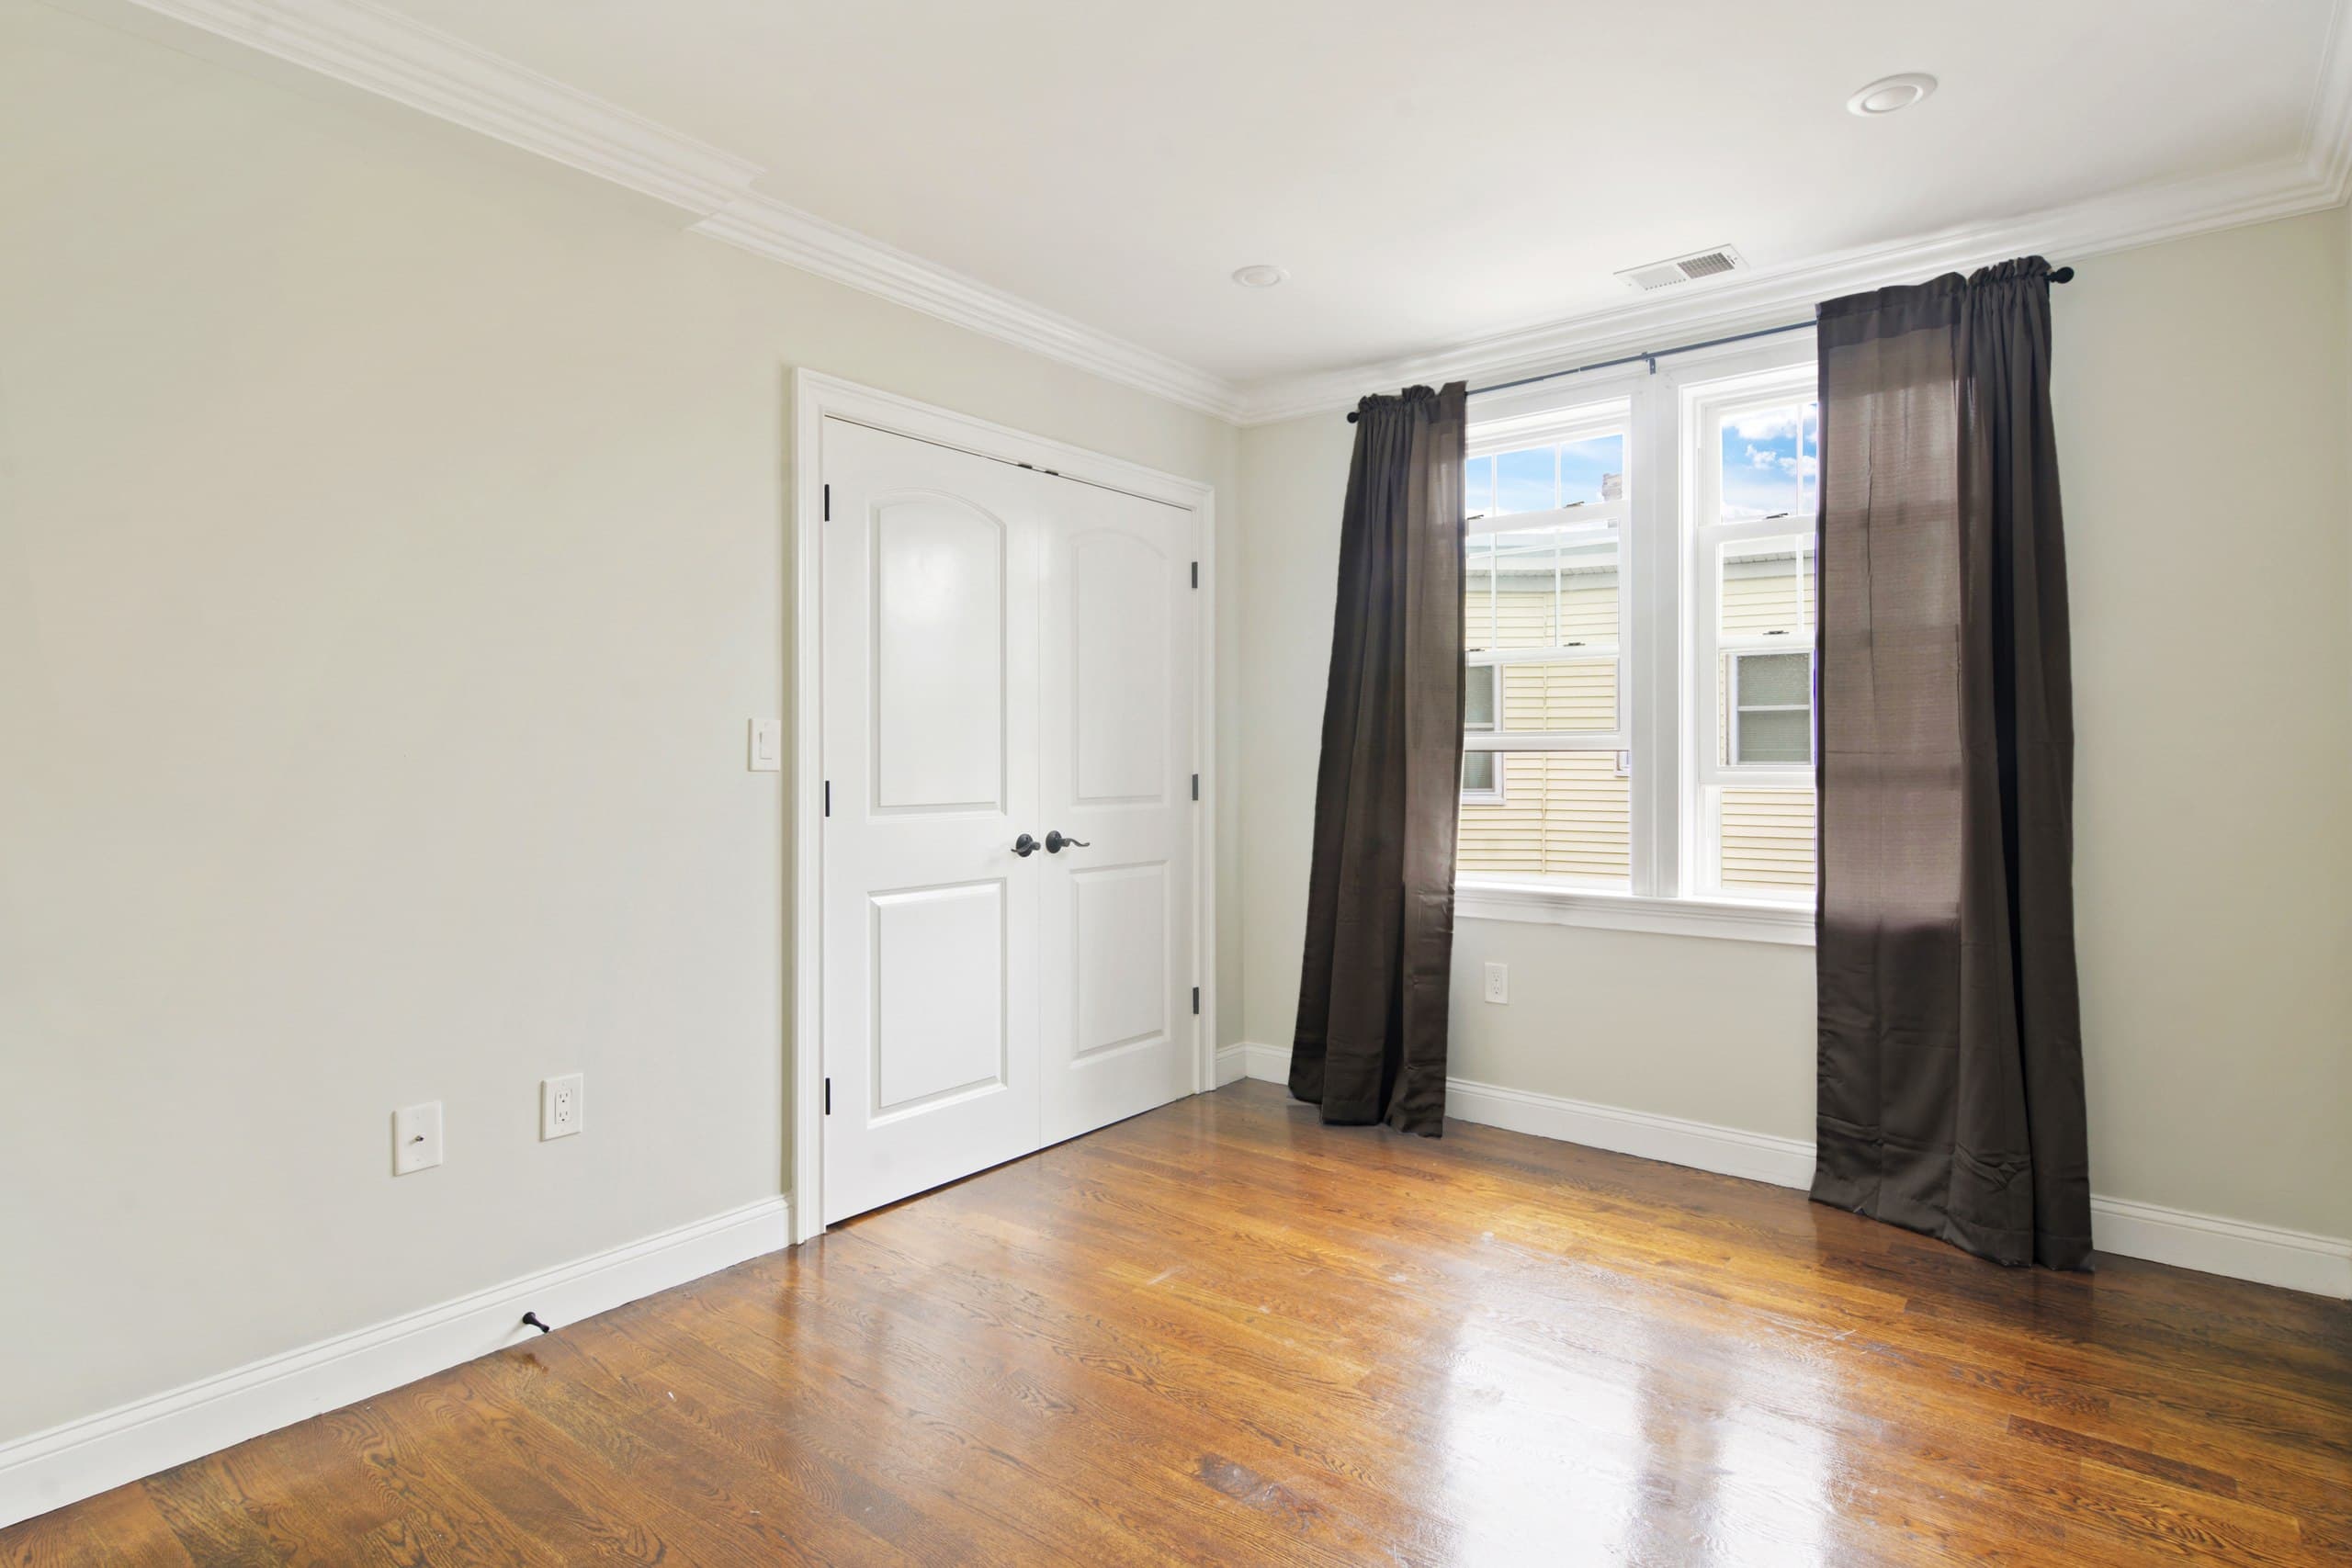 Photo 4 of #1564: Queen Bedroom A at June Homes